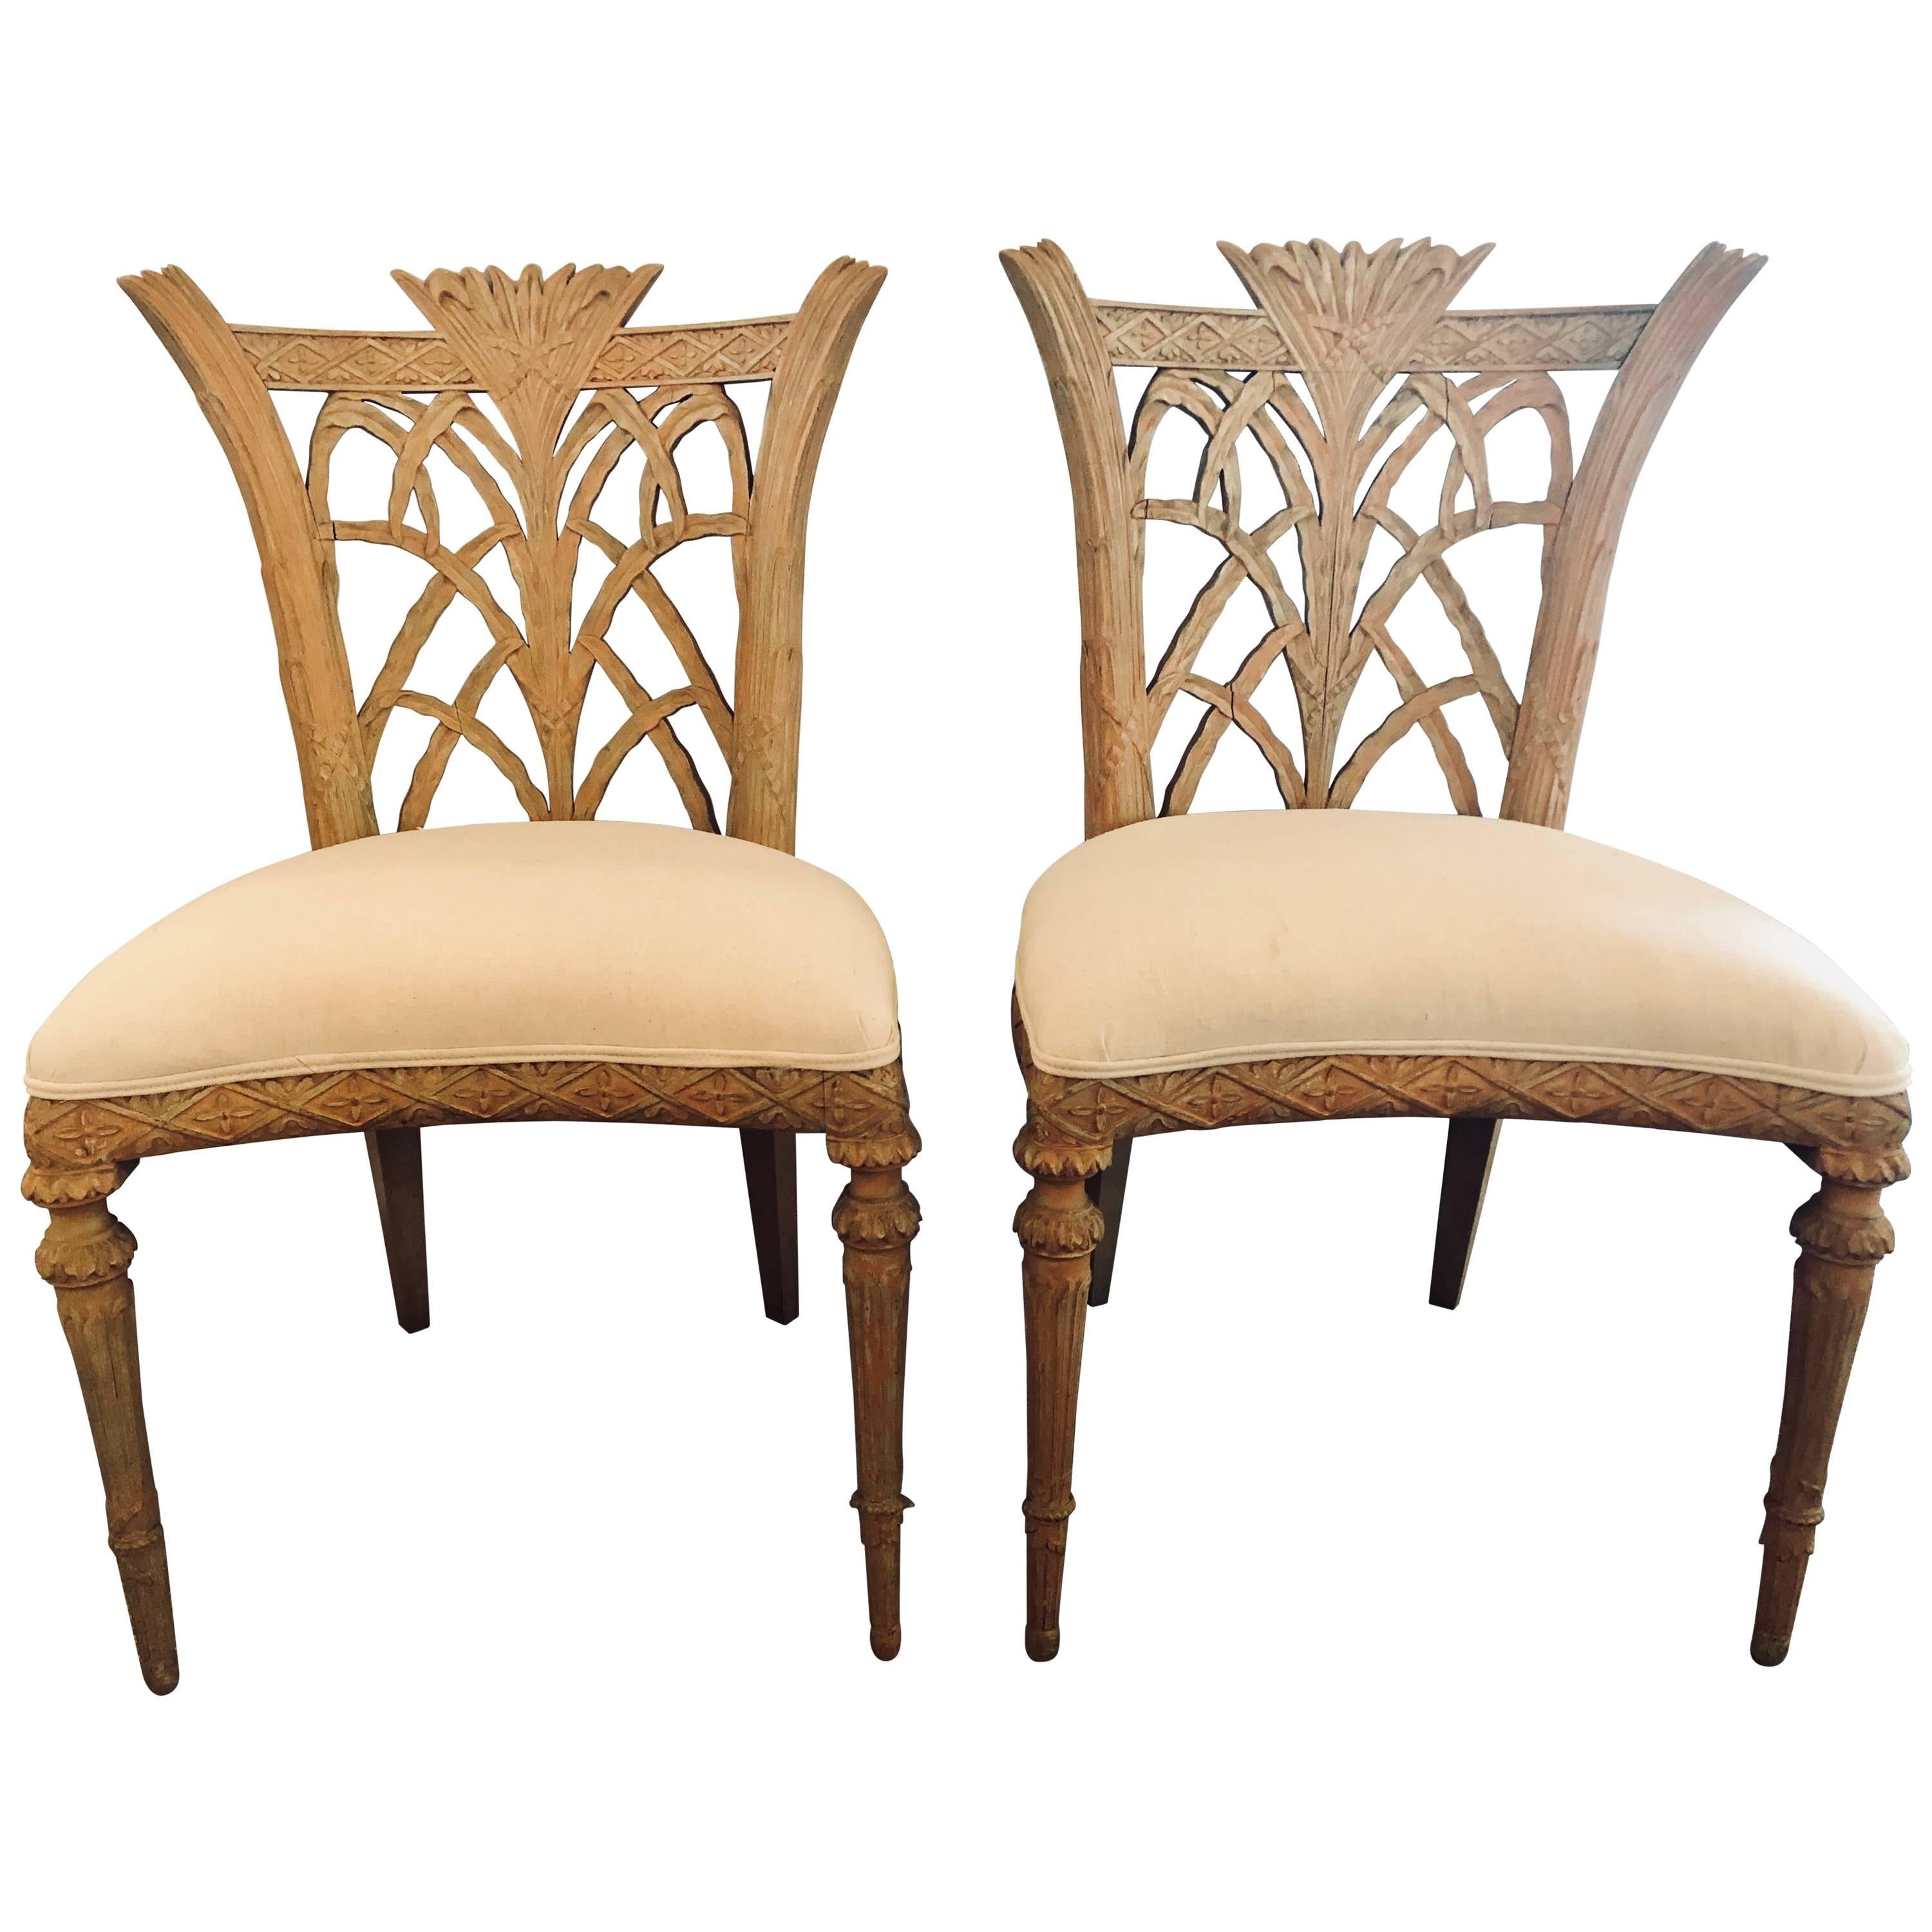 Pair of Hollywood Regency Maison Jansen Palm Tree Form Carved Side Chairs